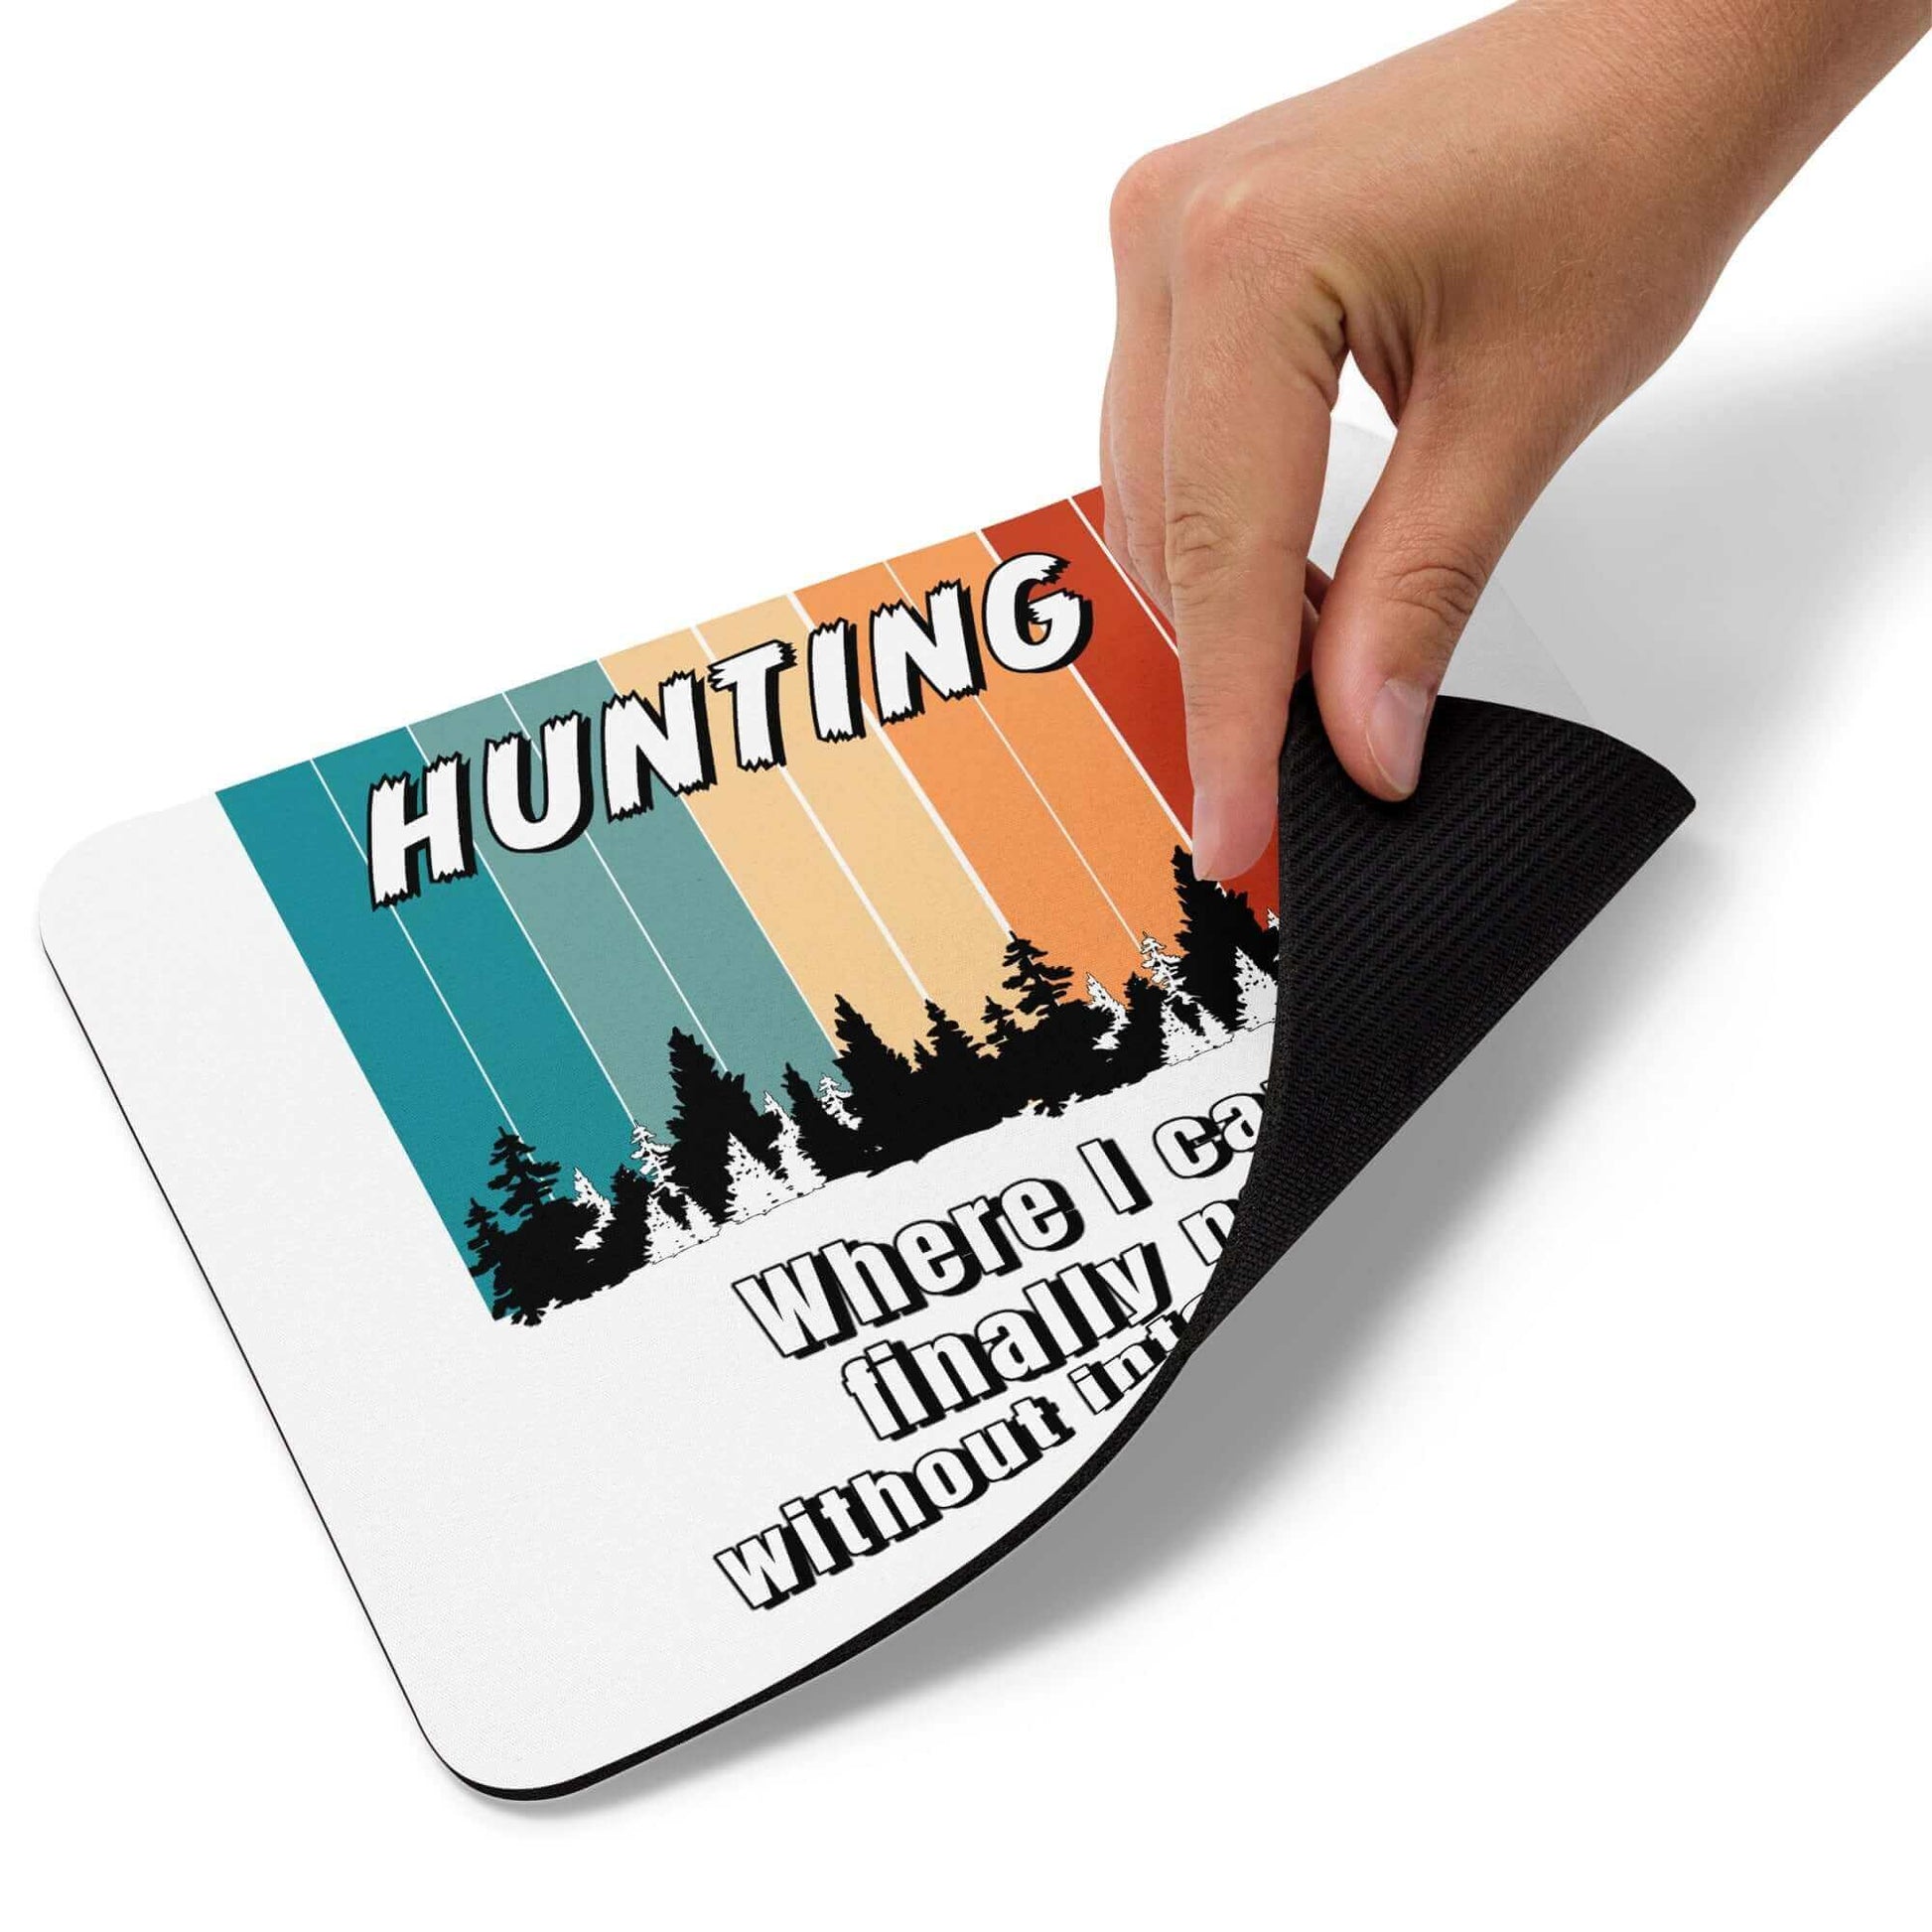 HUNTING - Where I get to nap without interruption - Mouse pad - Horrible Designs